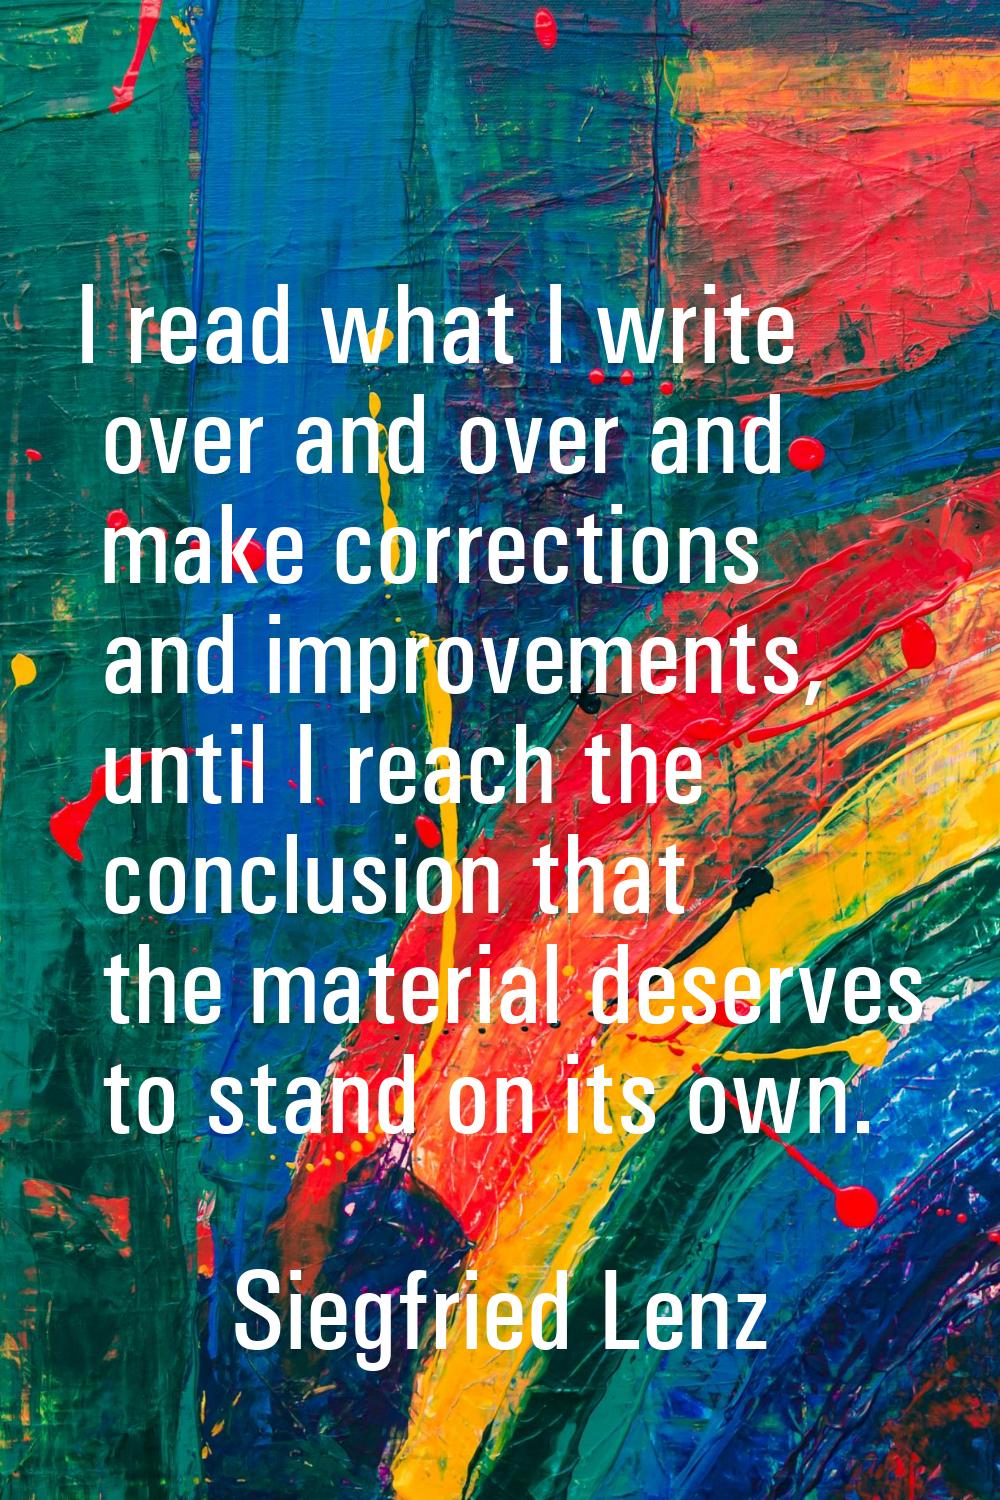 I read what I write over and over and make corrections and improvements, until I reach the conclusi